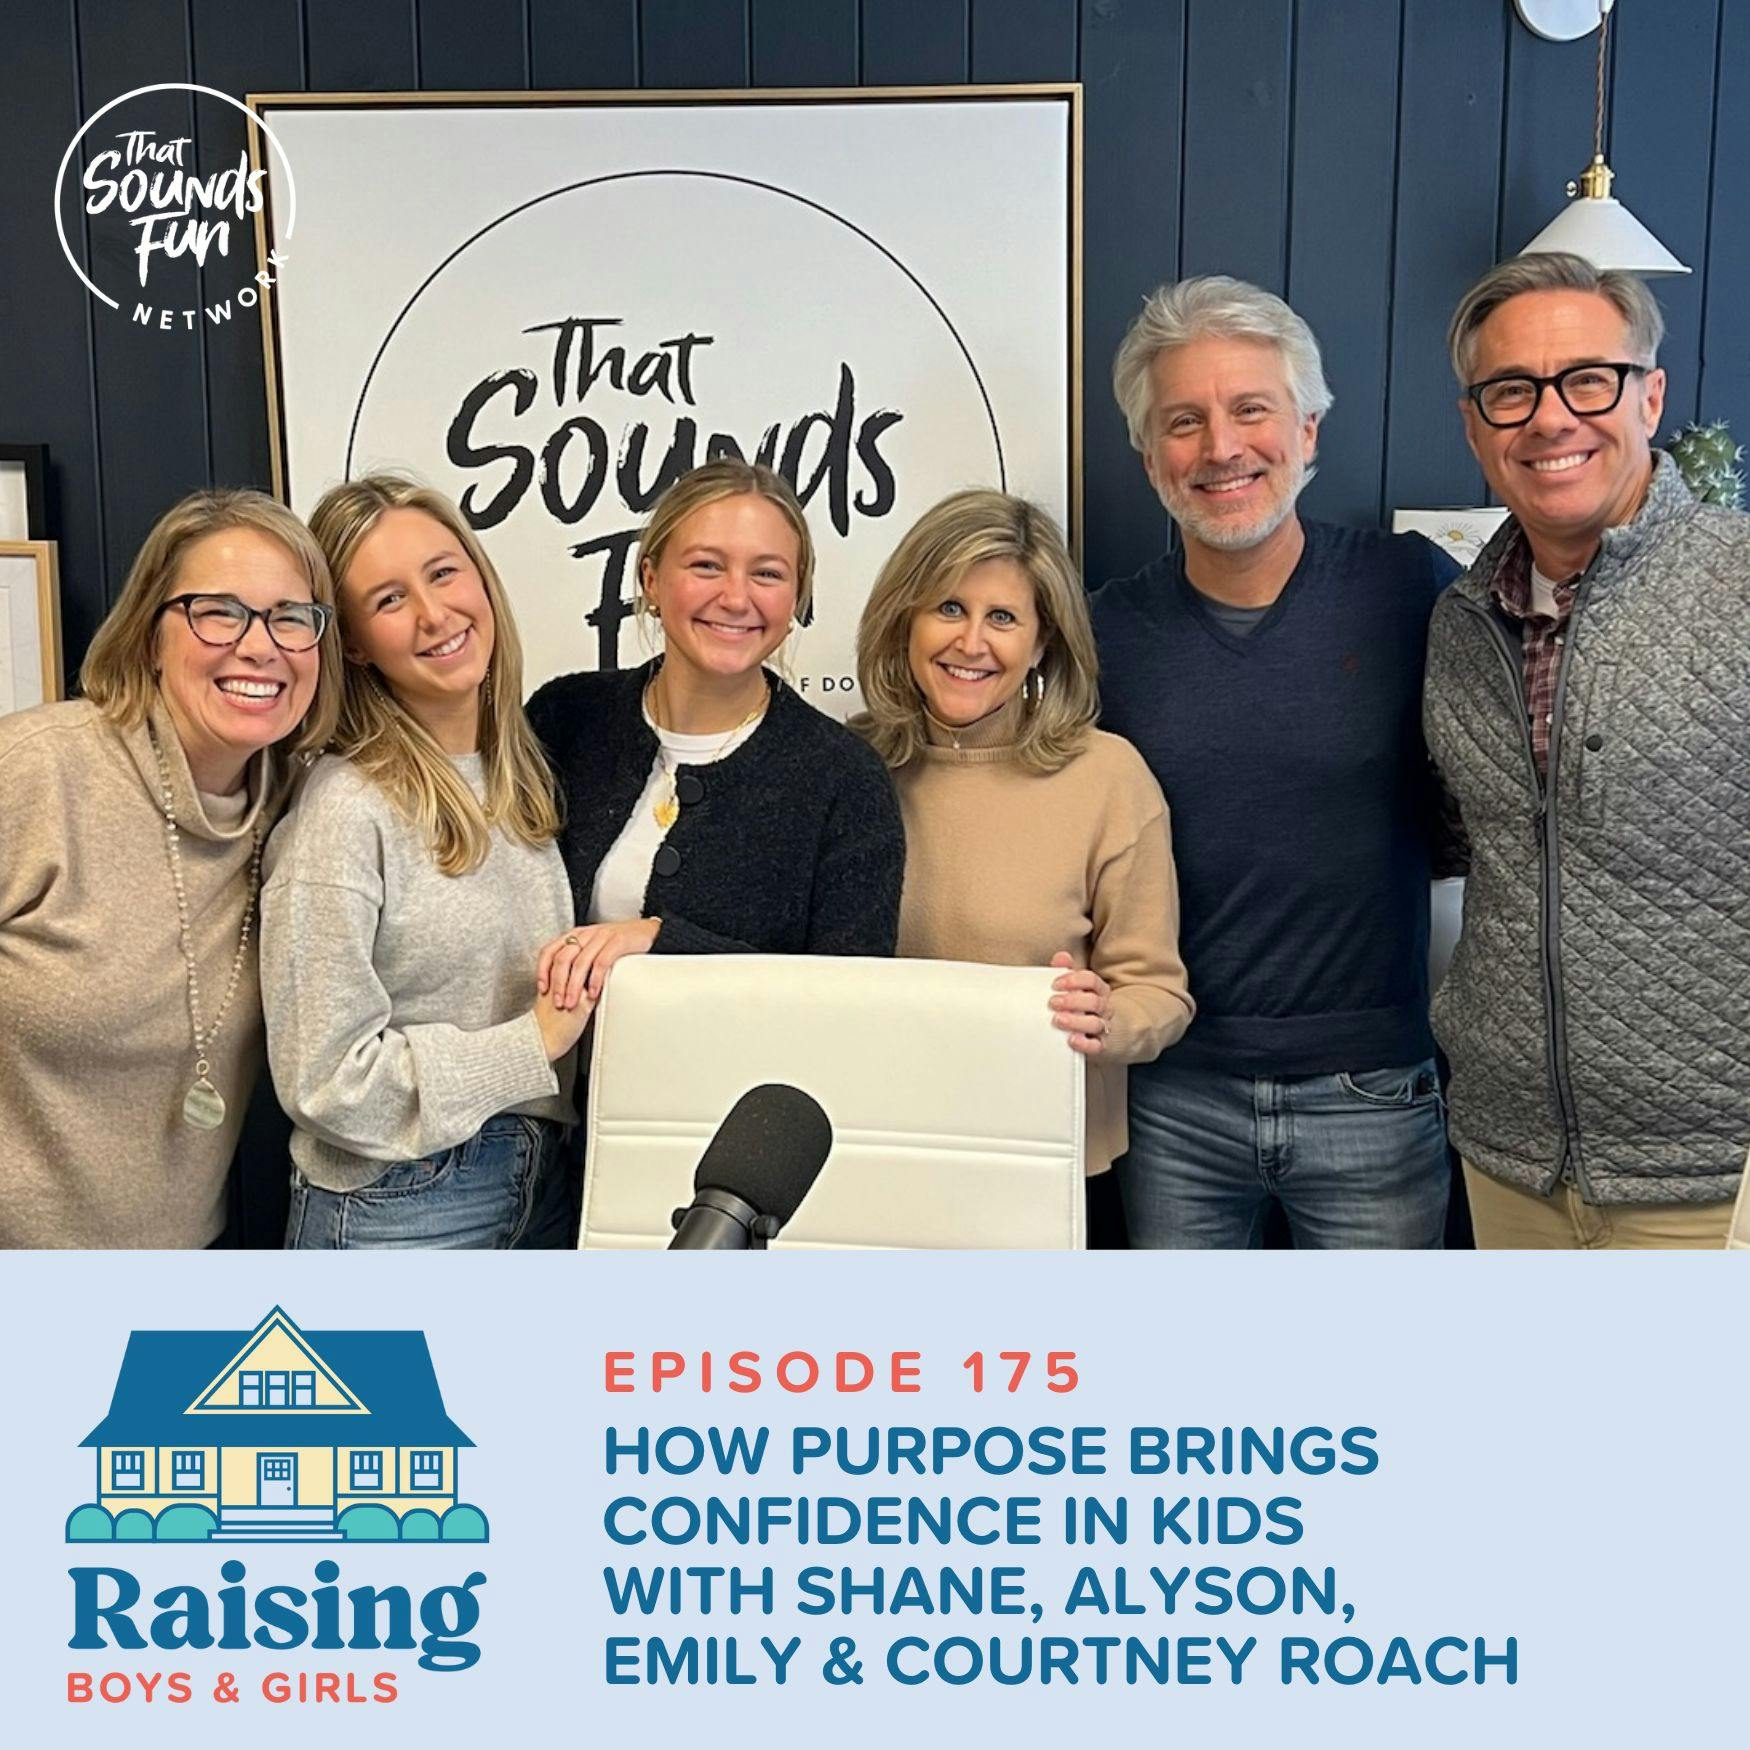 Episode 175: How Purpose Brings Confidence in Kids with Shane, Alyson, Emily, and Courtney Roach